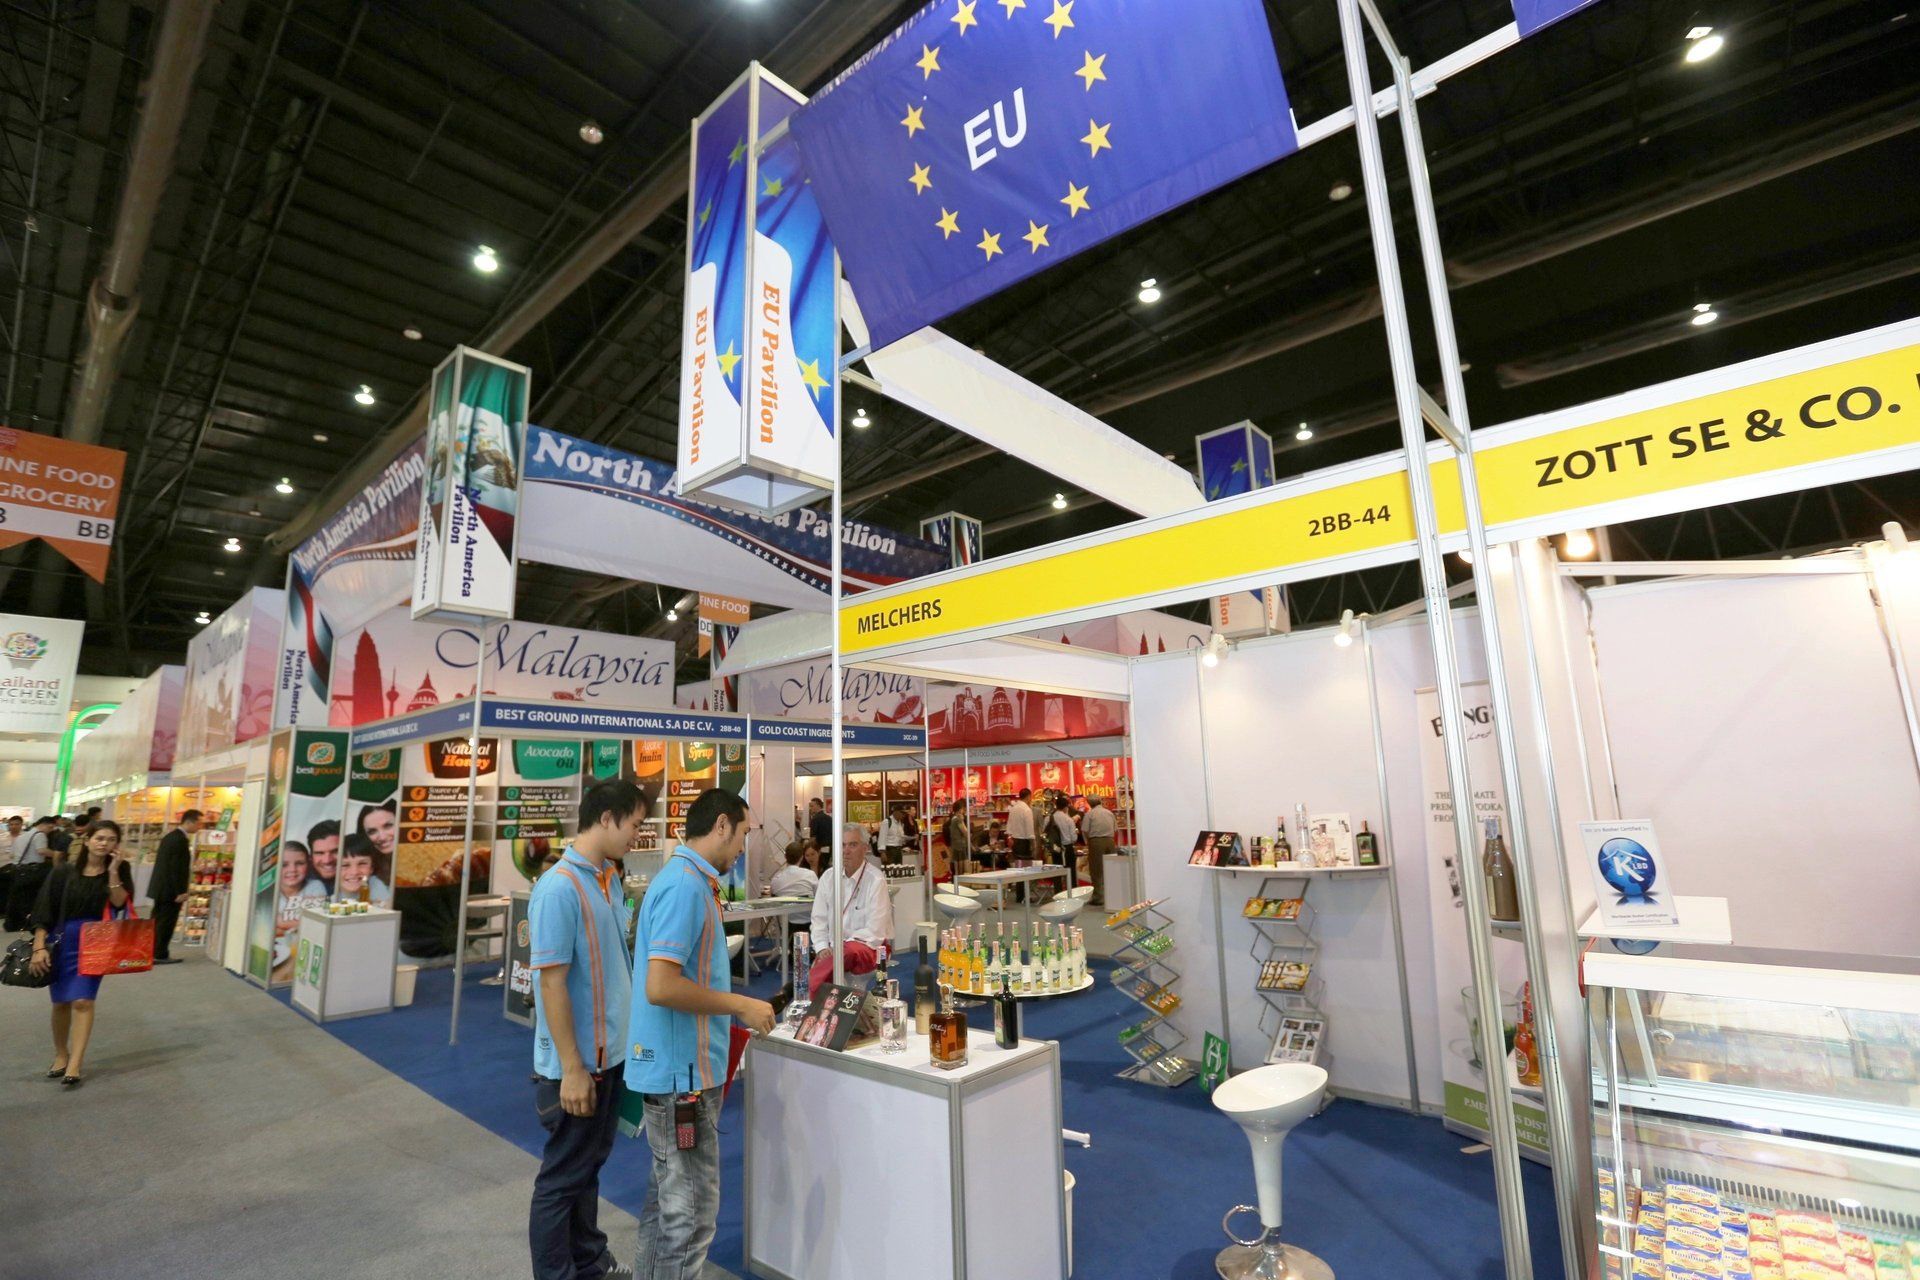 EU Pavilion @ Thaifex 2014. Booth designed and built by Essential Global Fairs.